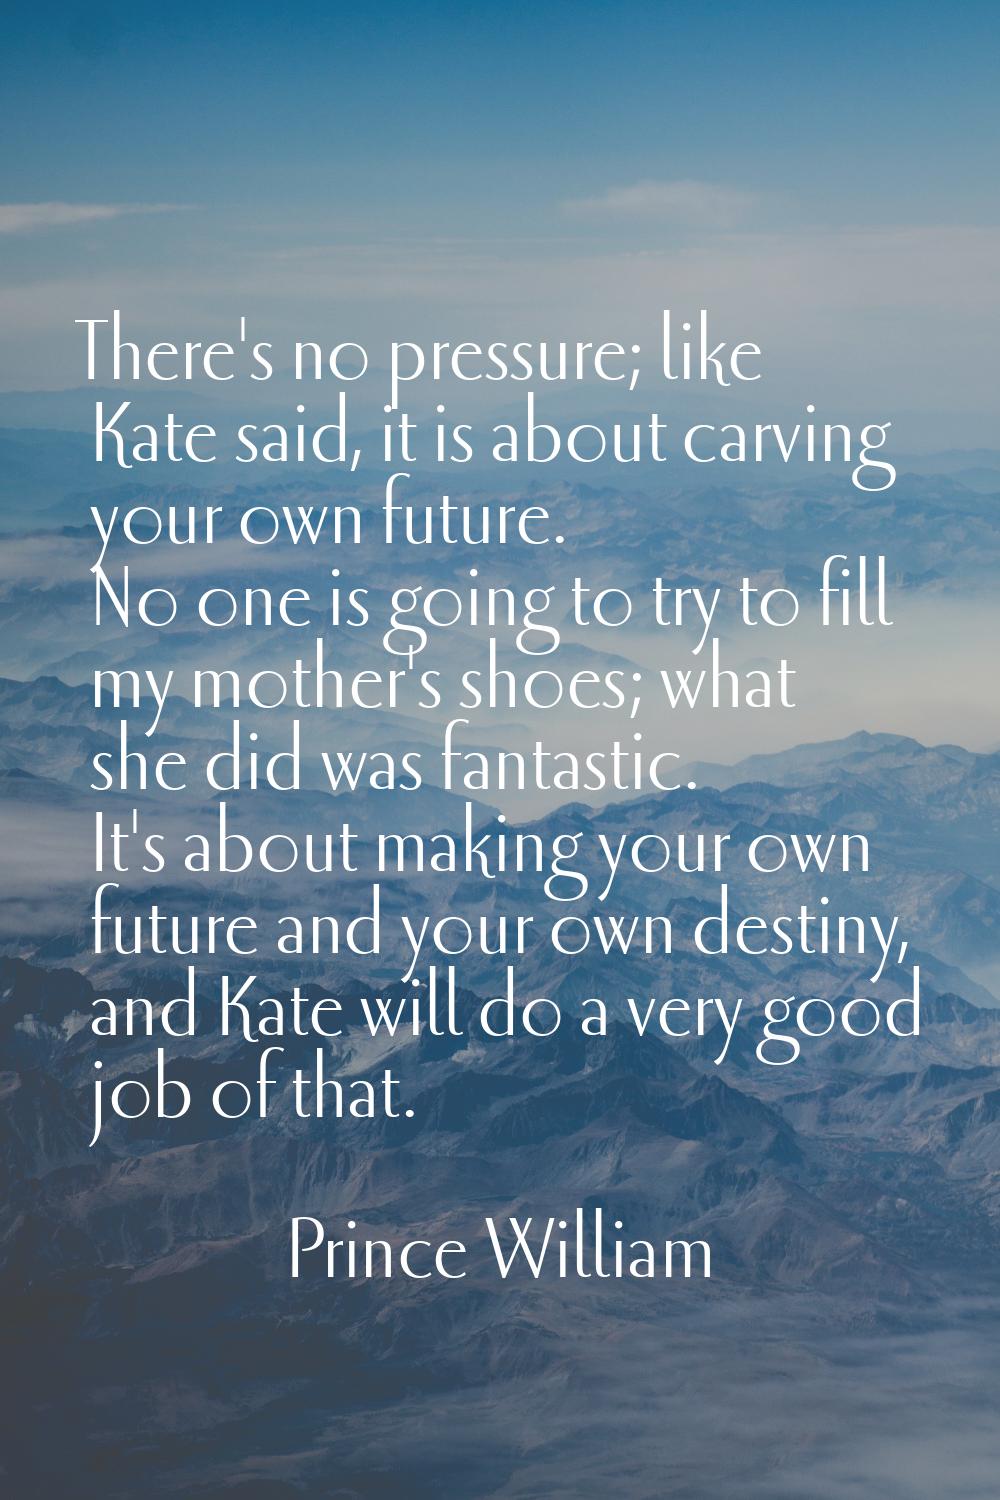 There's no pressure; like Kate said, it is about carving your own future. No one is going to try to